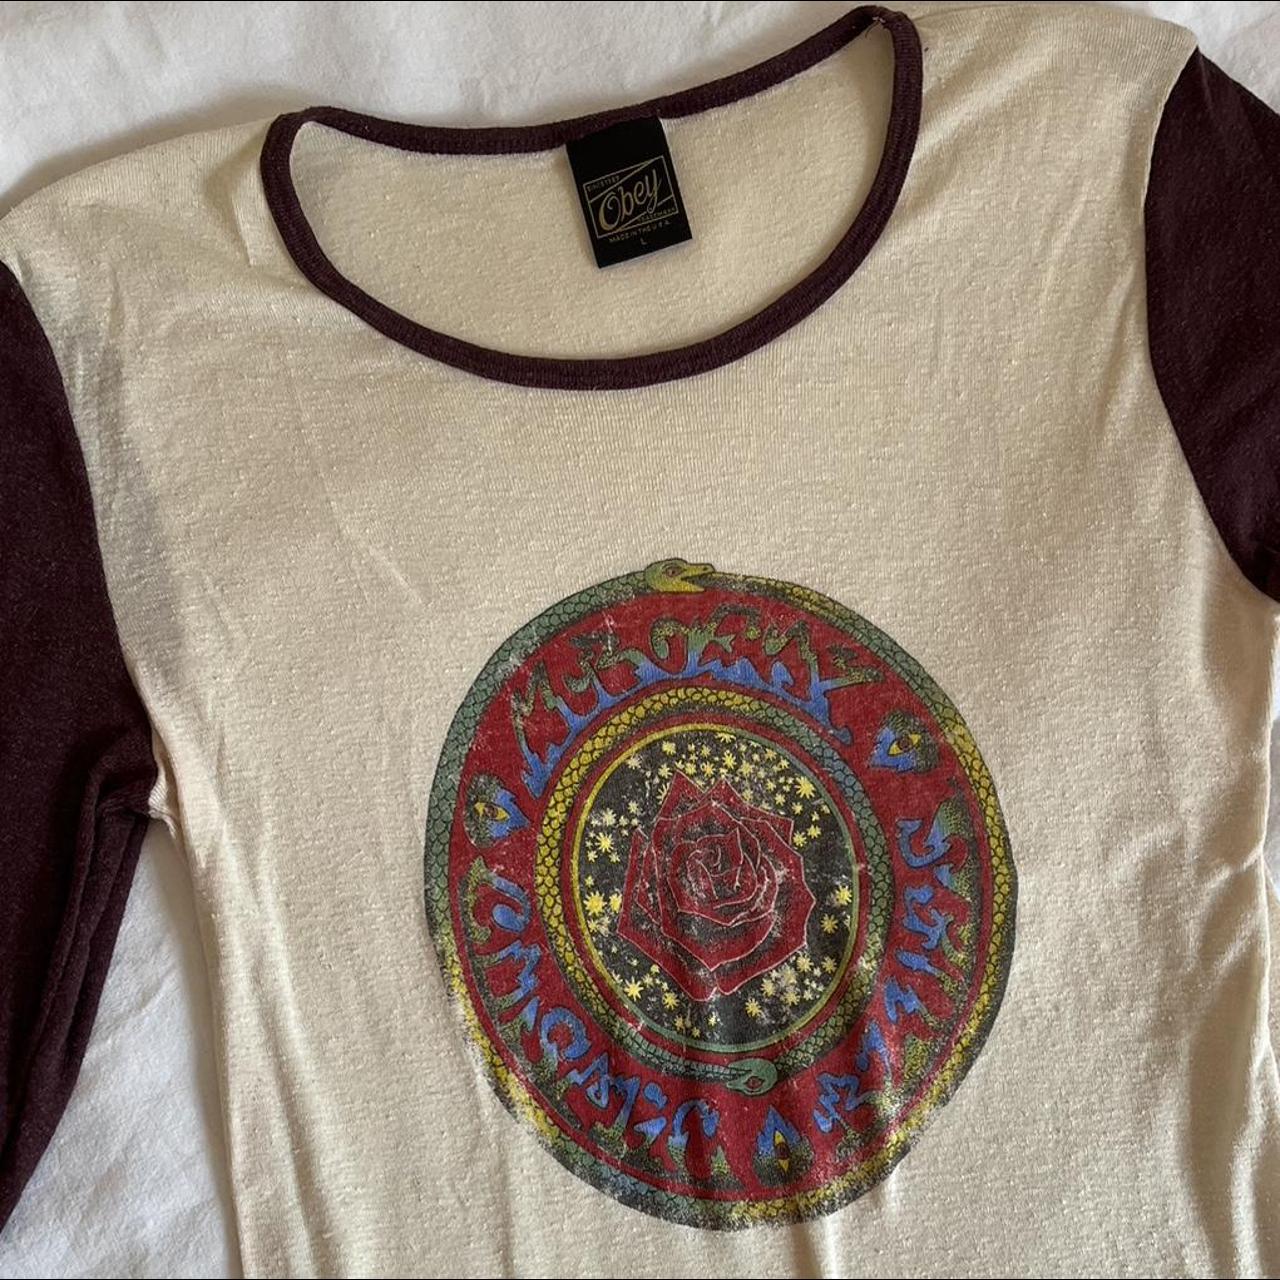 Obey Women's Burgundy and Cream T-shirt (4)